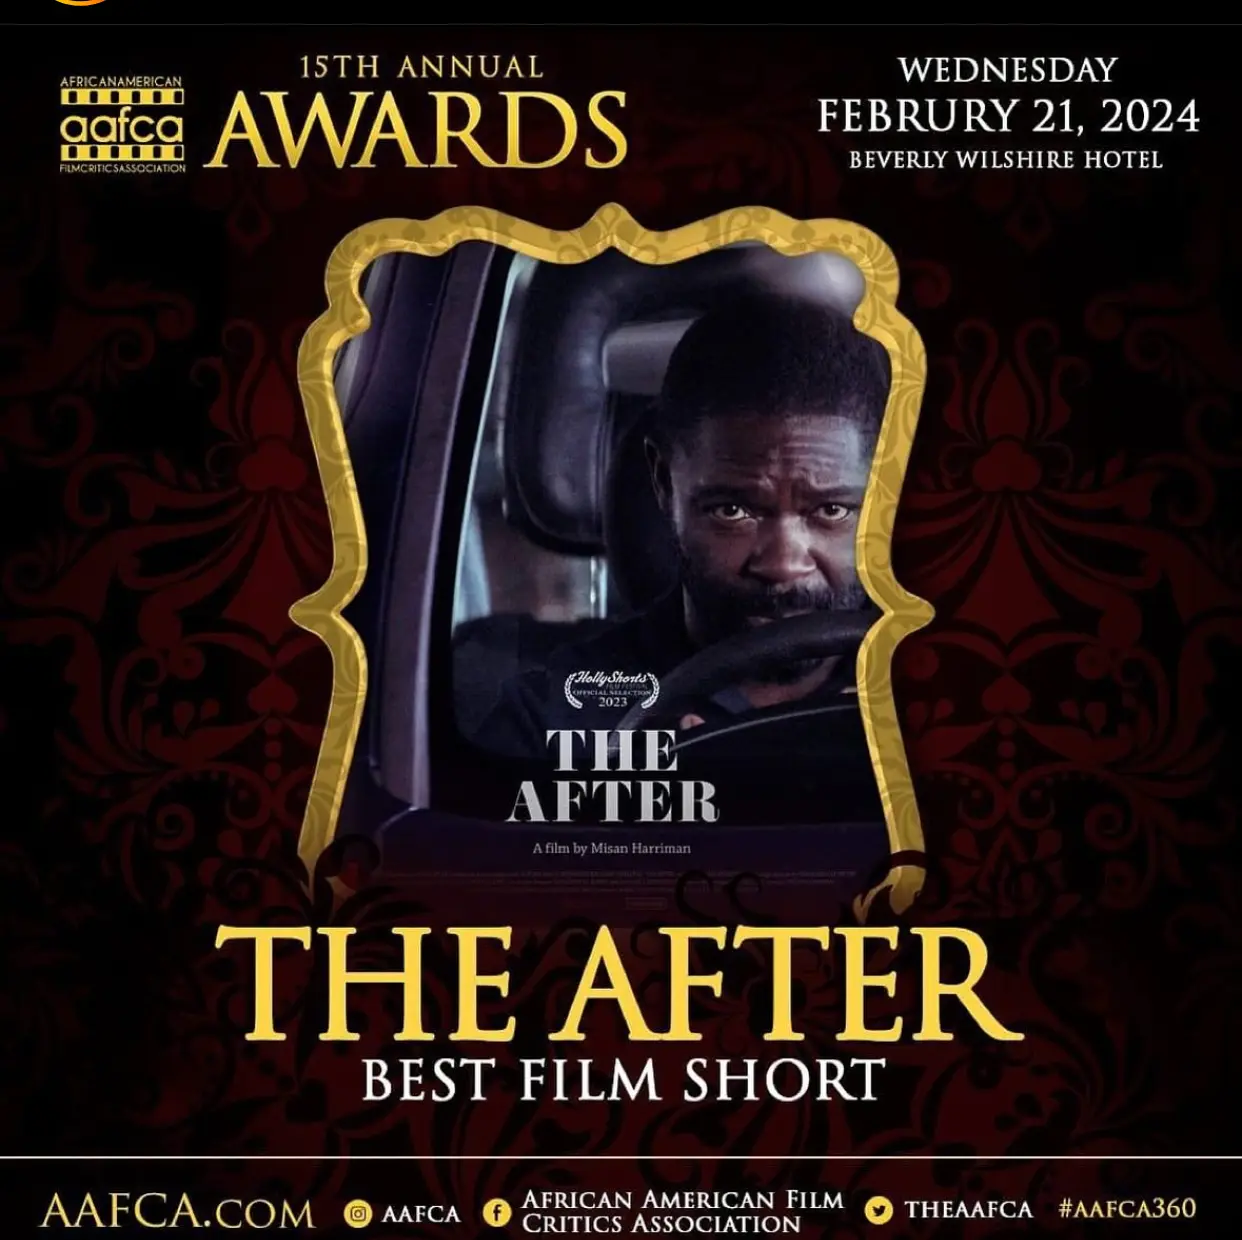 “The After” Secures Best Short Film Accolade at 2024 AAFCA Awards